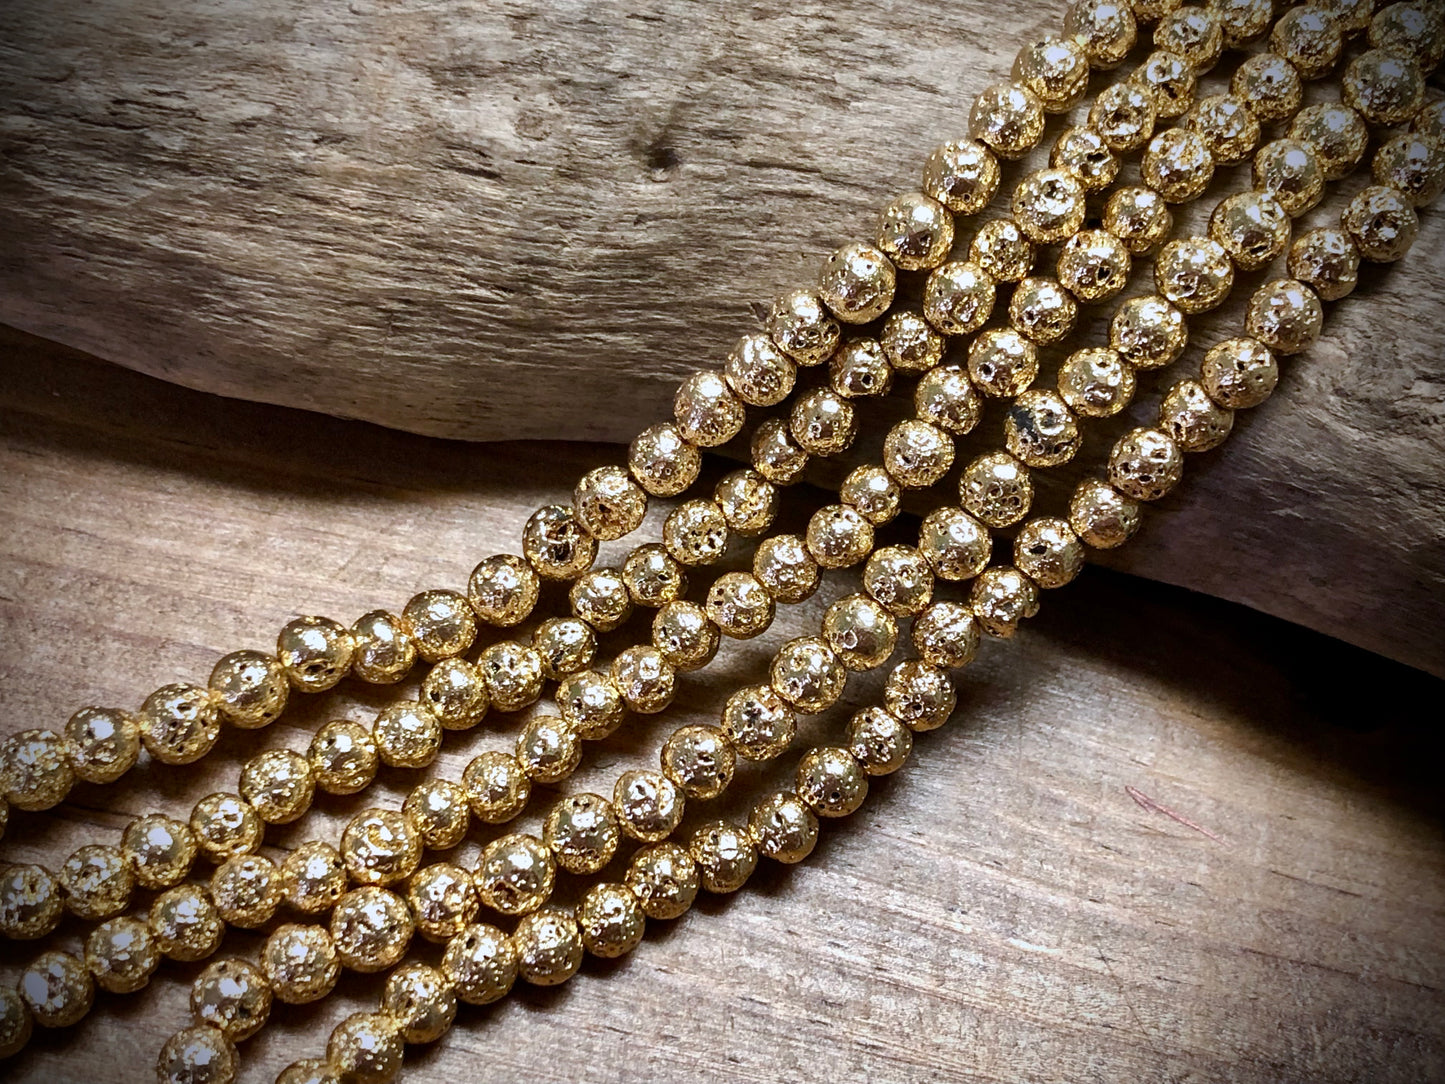 Electro-Coated Lava Bead Strand - Pale Gold - 4mm - 8”